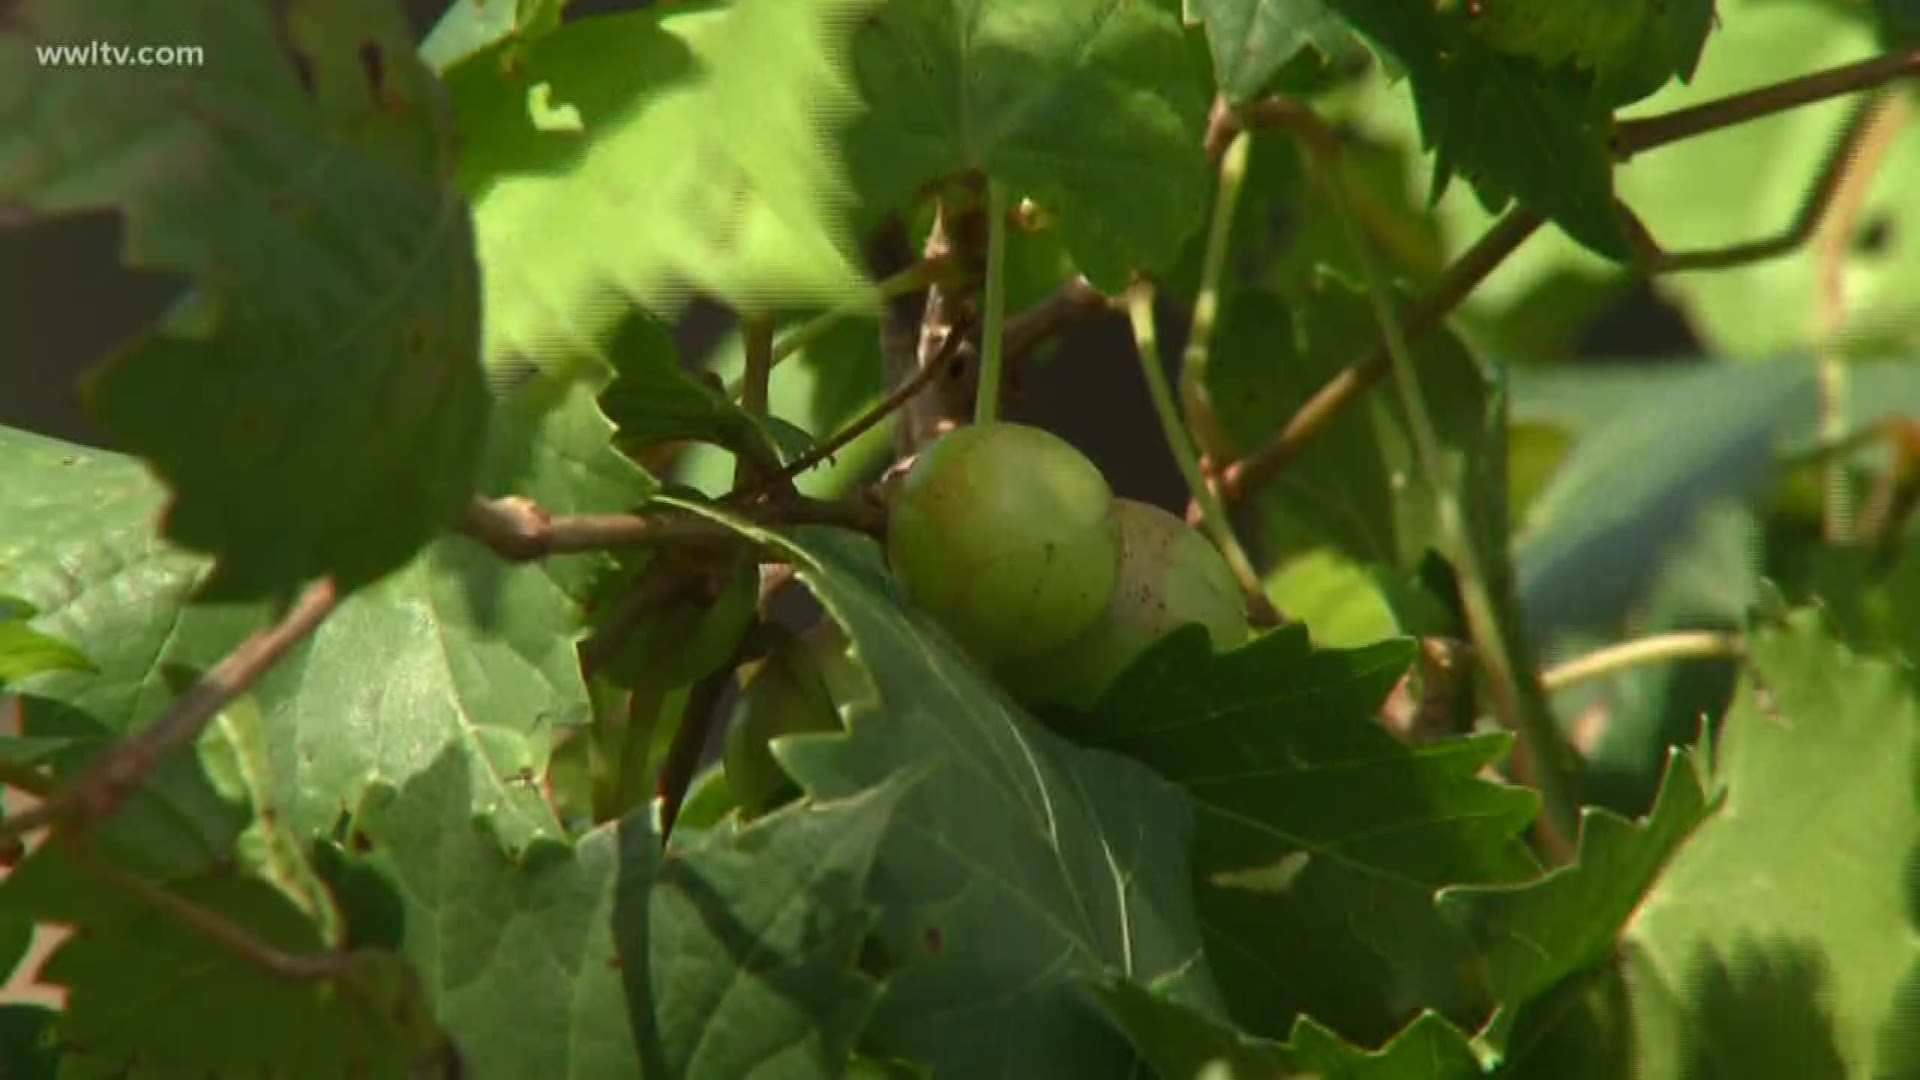 Horticulturist Heather Kirk-Ballard shows you how to help you new Muscadine plant thrive